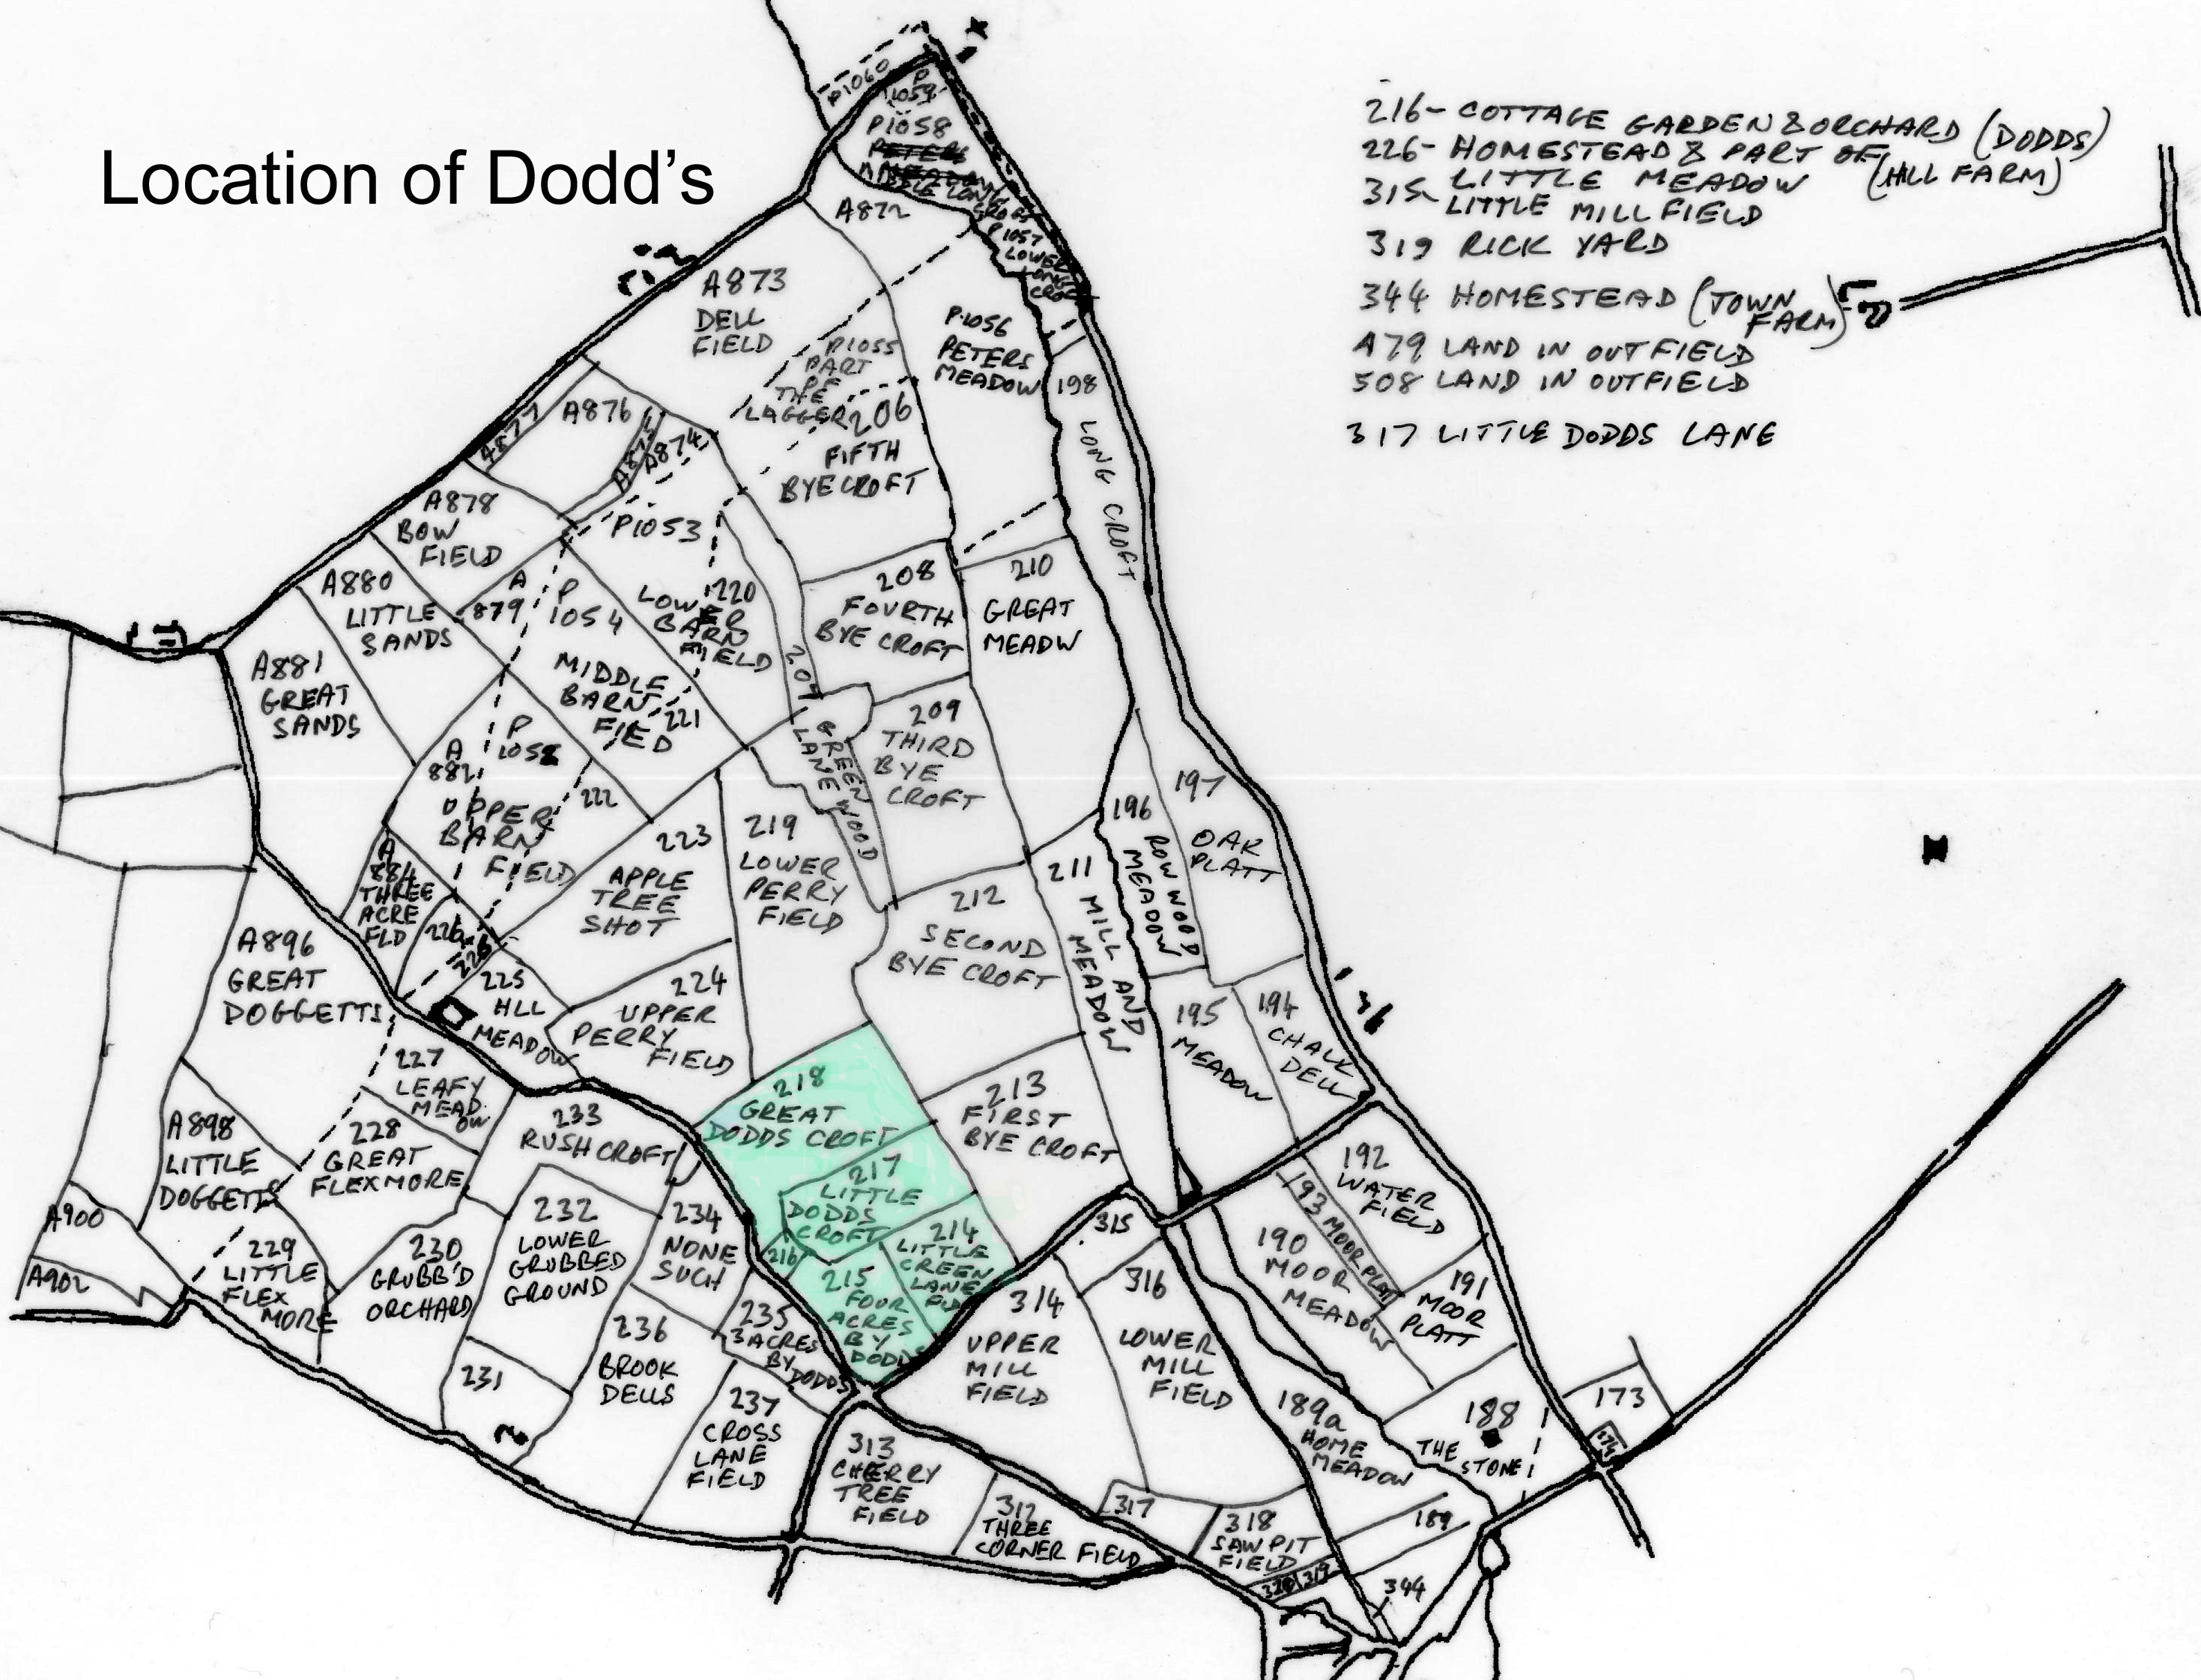 Position of the fields of Dodds